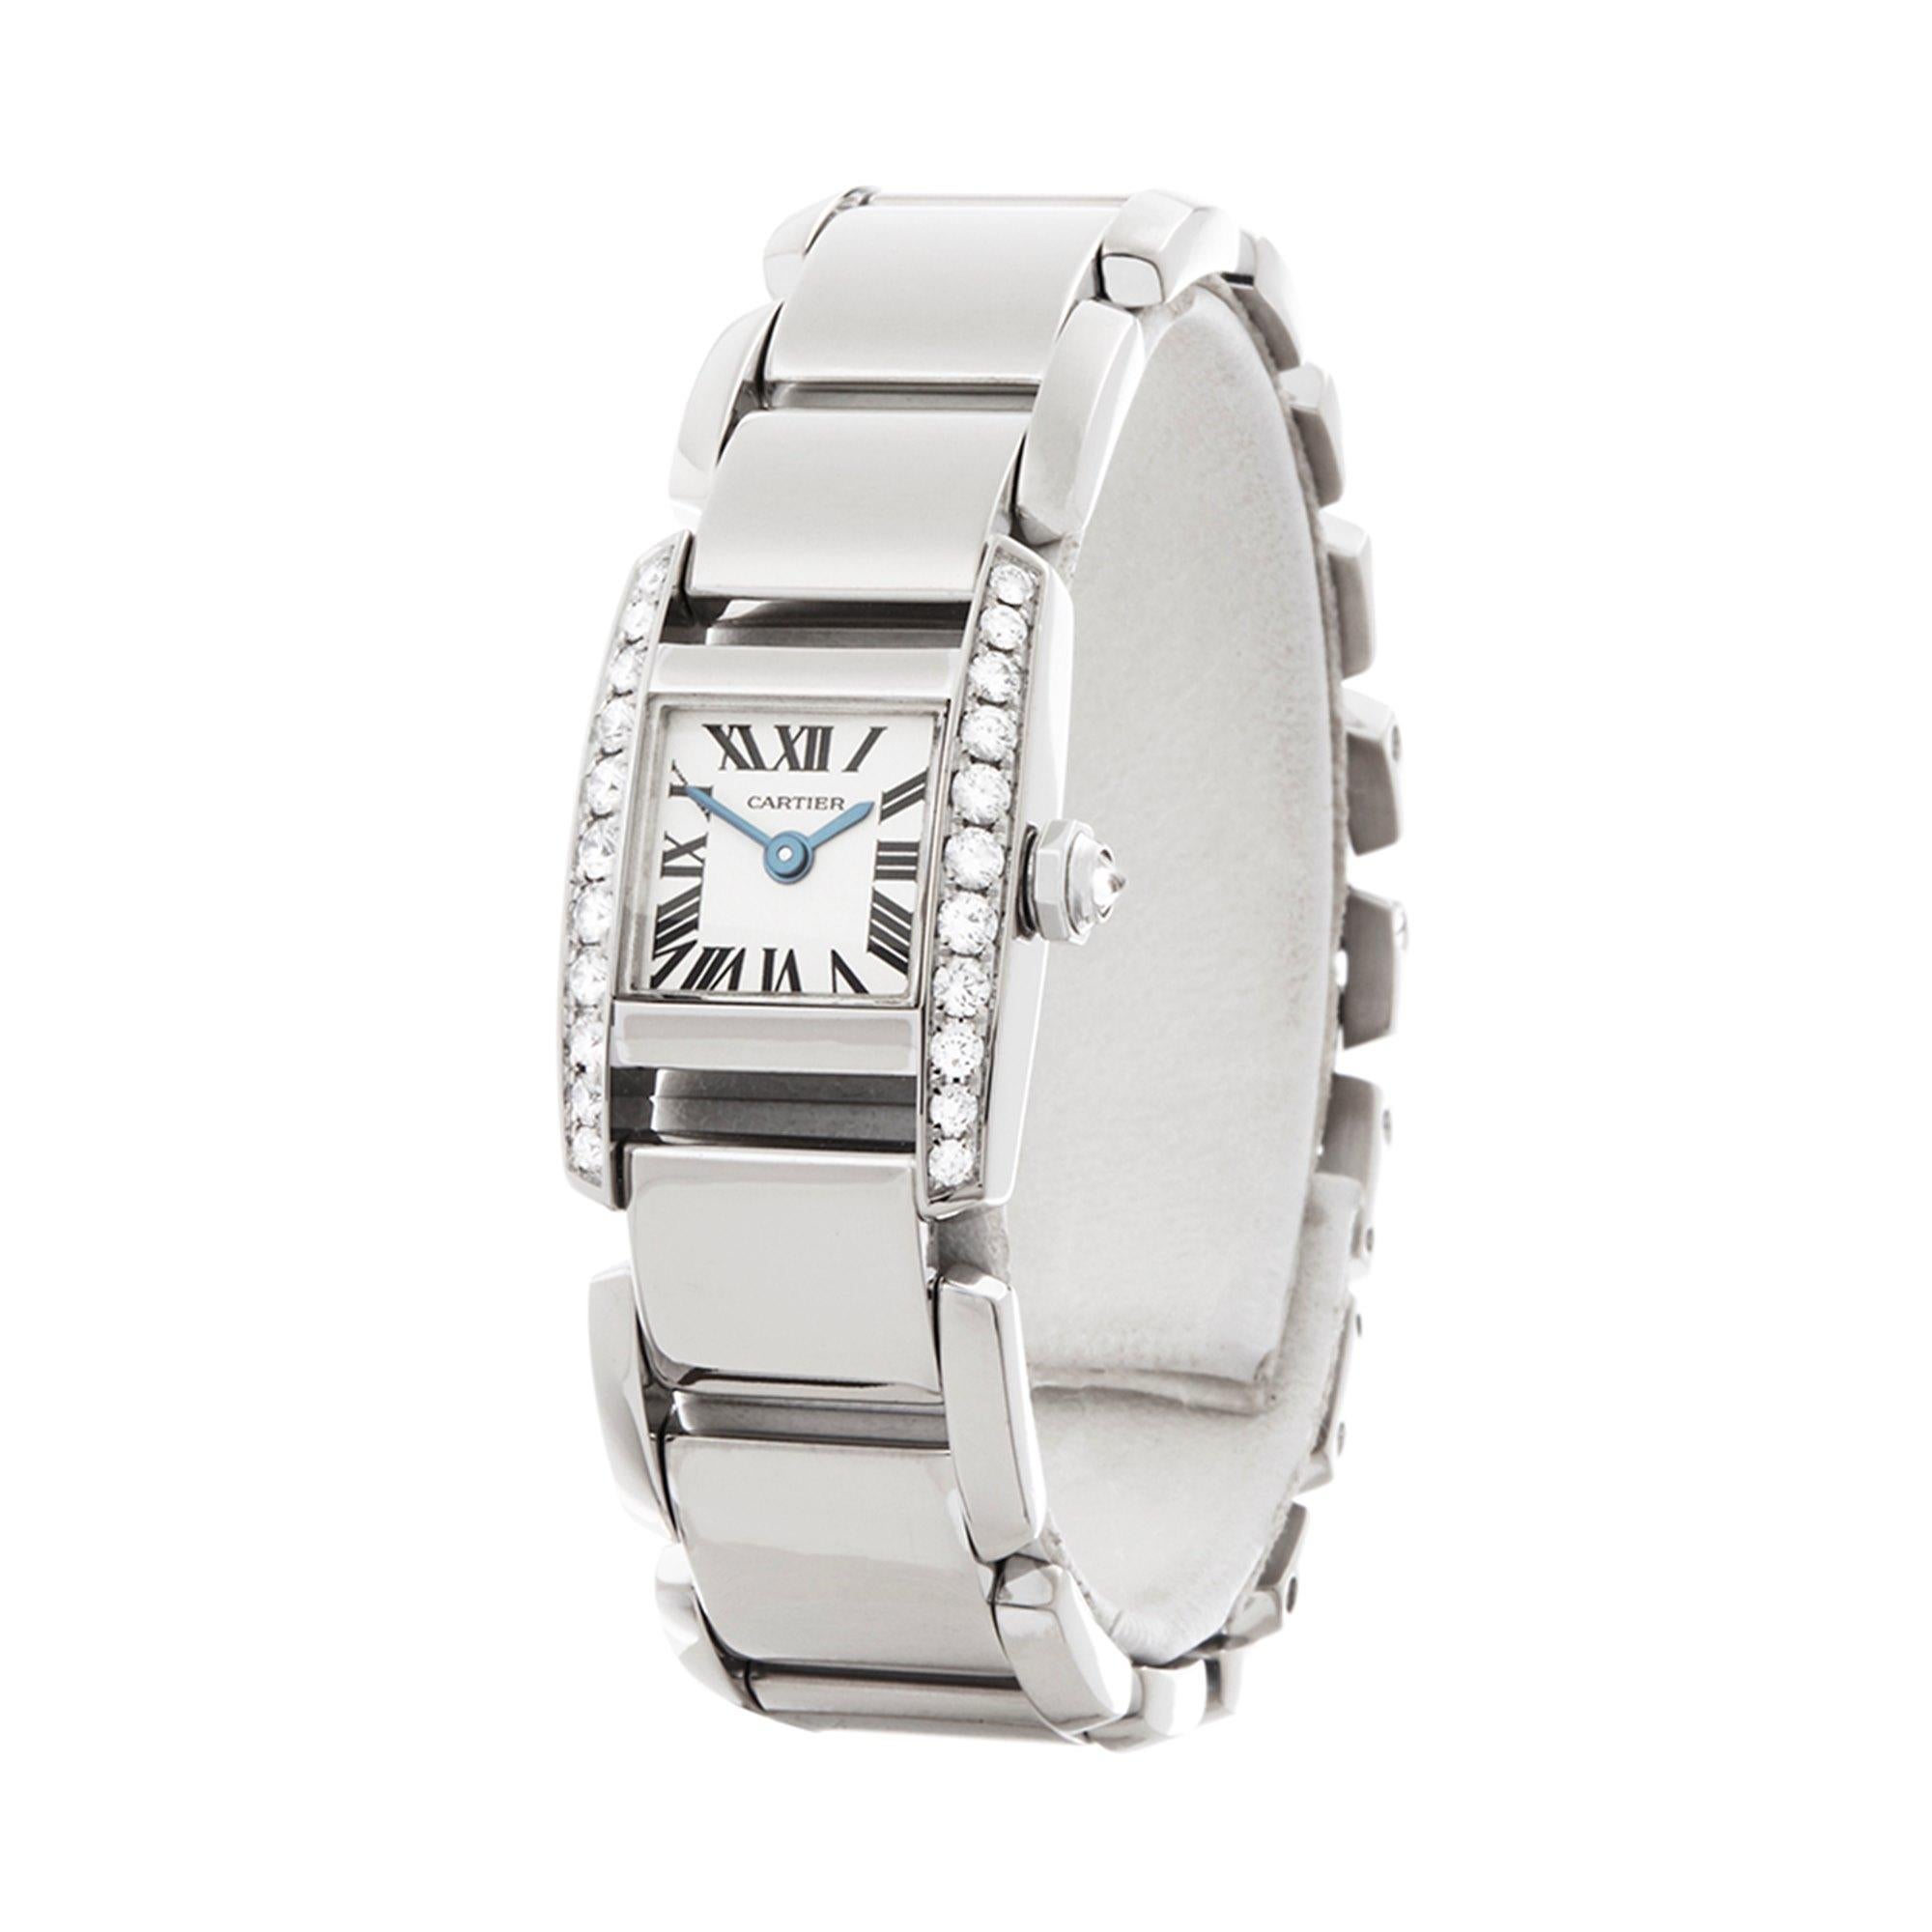 Xupes Reference: W007475
Manufacturer: Cartier
Model: Tankissime
Model Variant: 
Model Number: WE70069H 2831
Age: Circa 2000
Gender: Ladies
Complete With: Xupes Presentation Box
Dial: White Roman
Glass: Sapphire Crystal
Case Size: 16mm by 25mm
Case